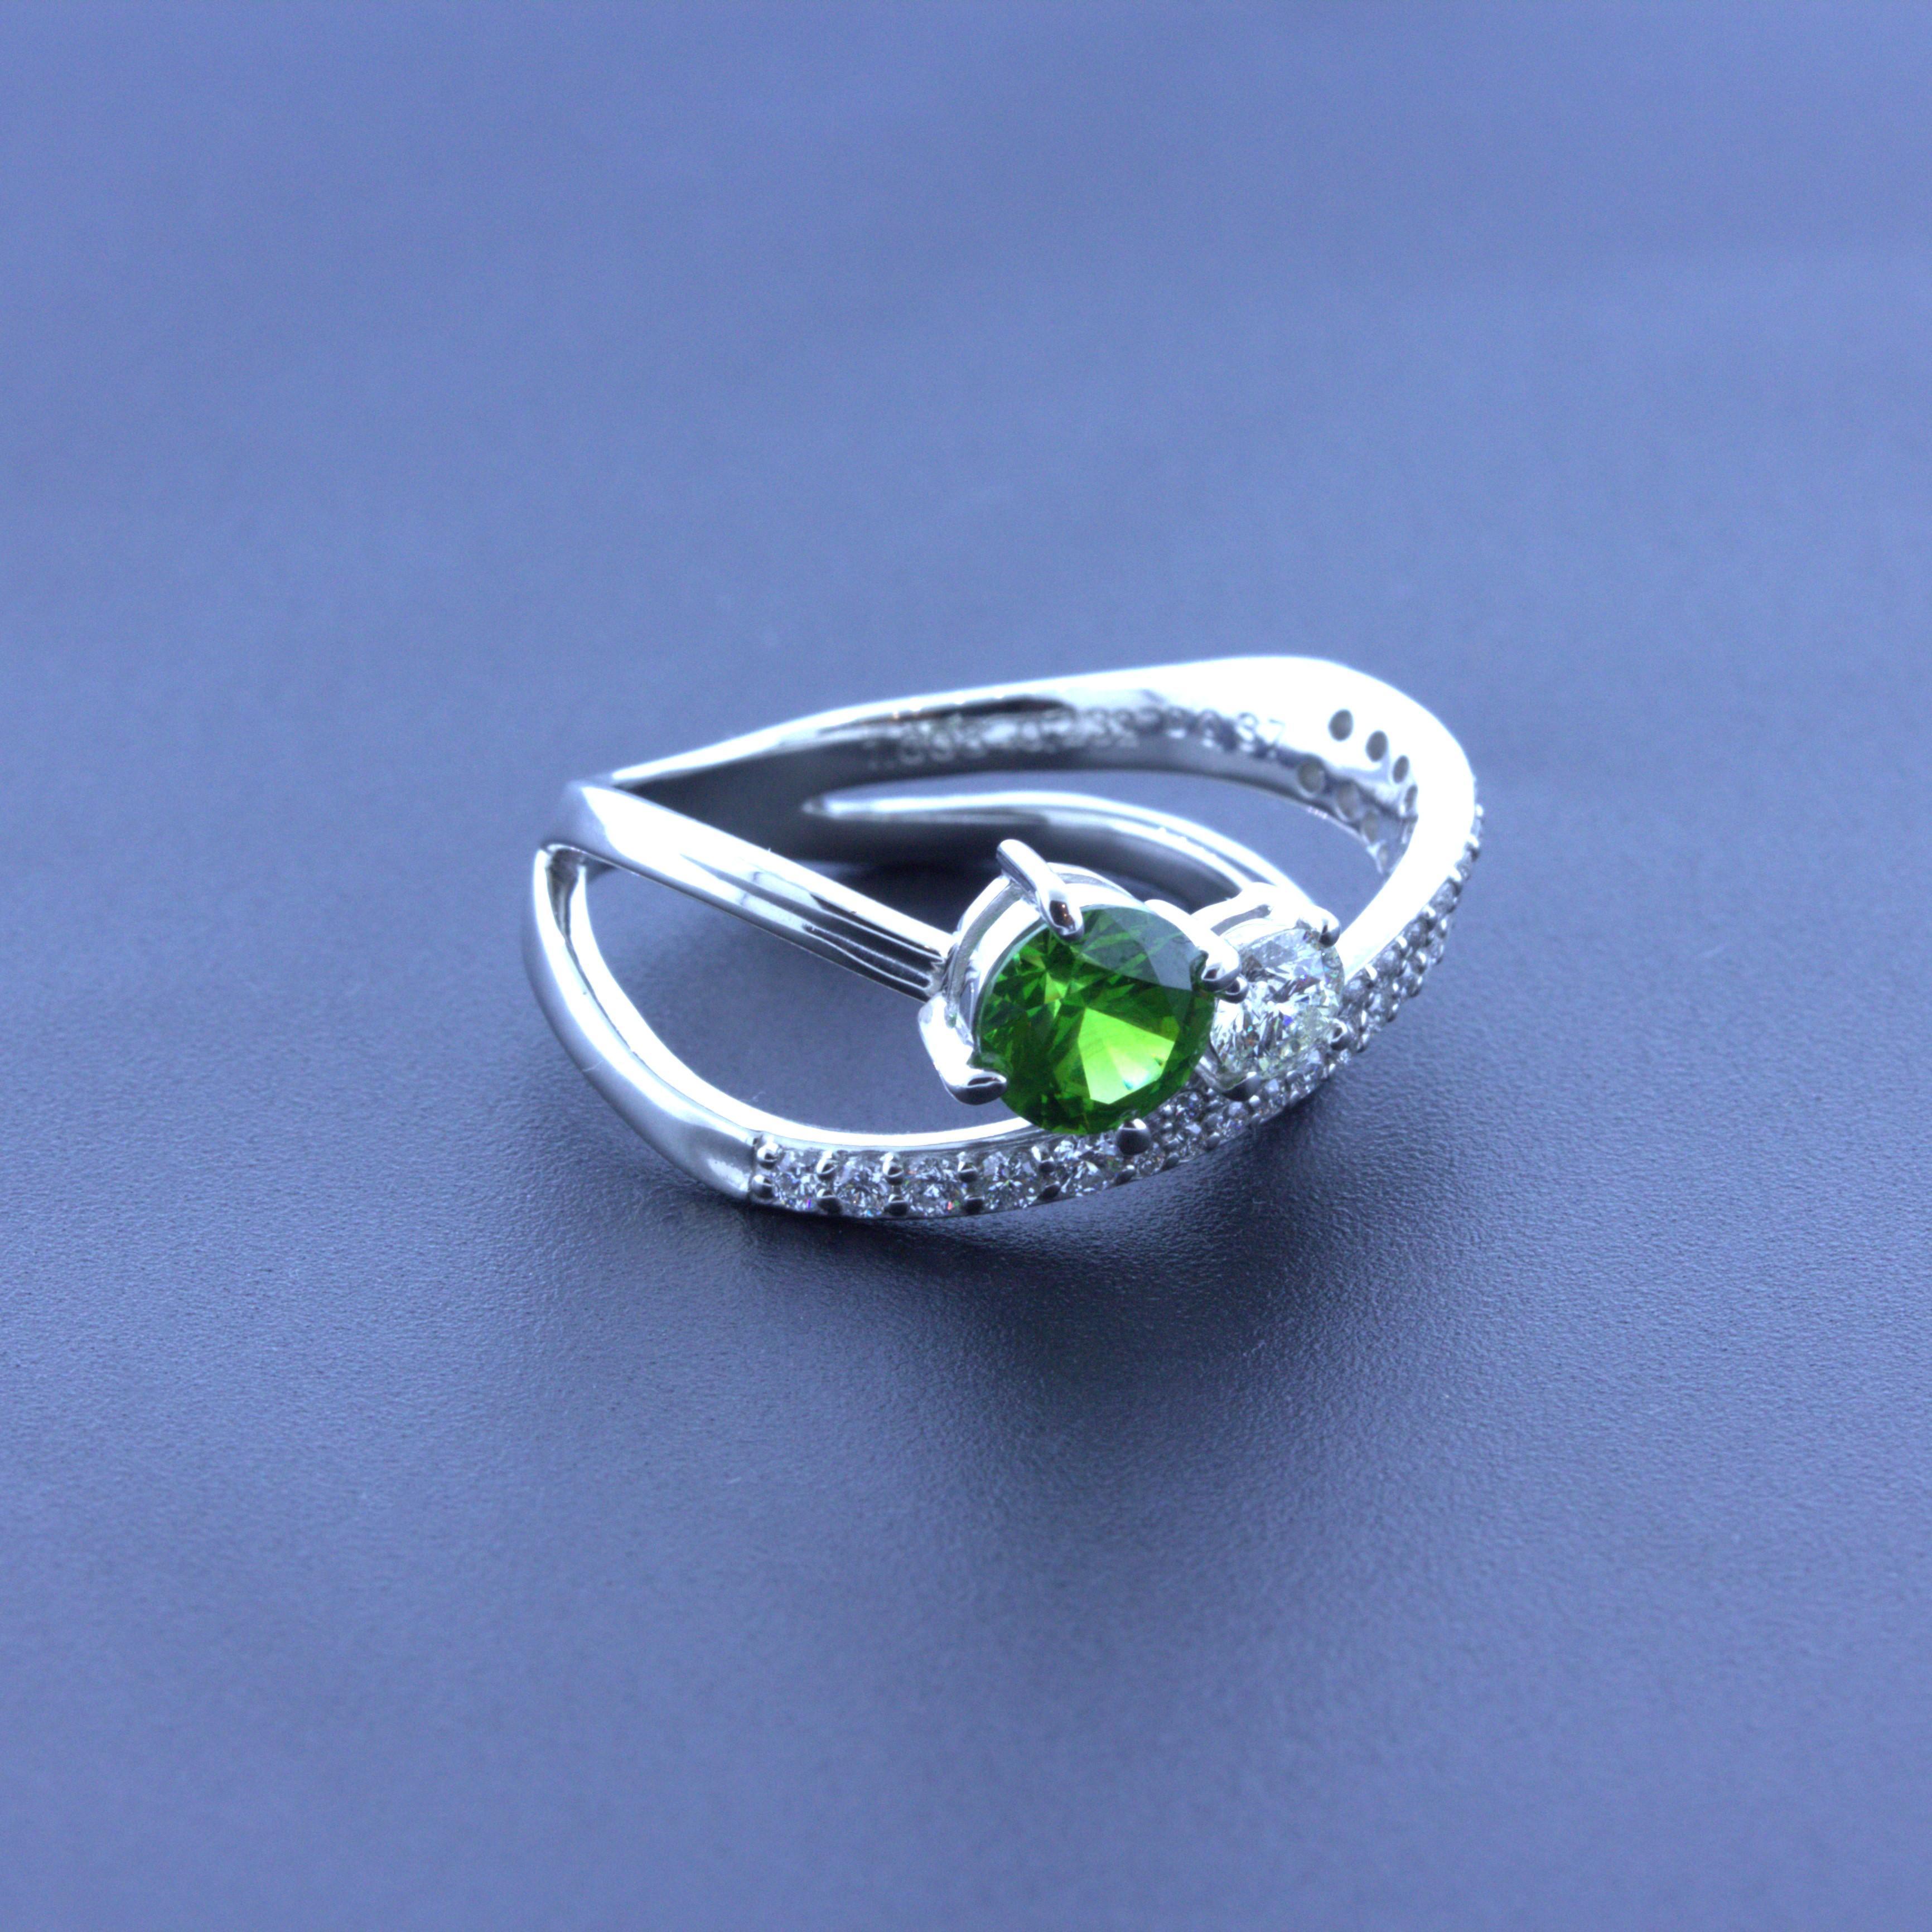 A fun and stylish platinum ring featuring a rare and beautiful demantoid garnet from the Ural Mountains in Russia. Demantoids are known for their intense green color and strong fire and brilliance. This stone is no different, as it has a very rich